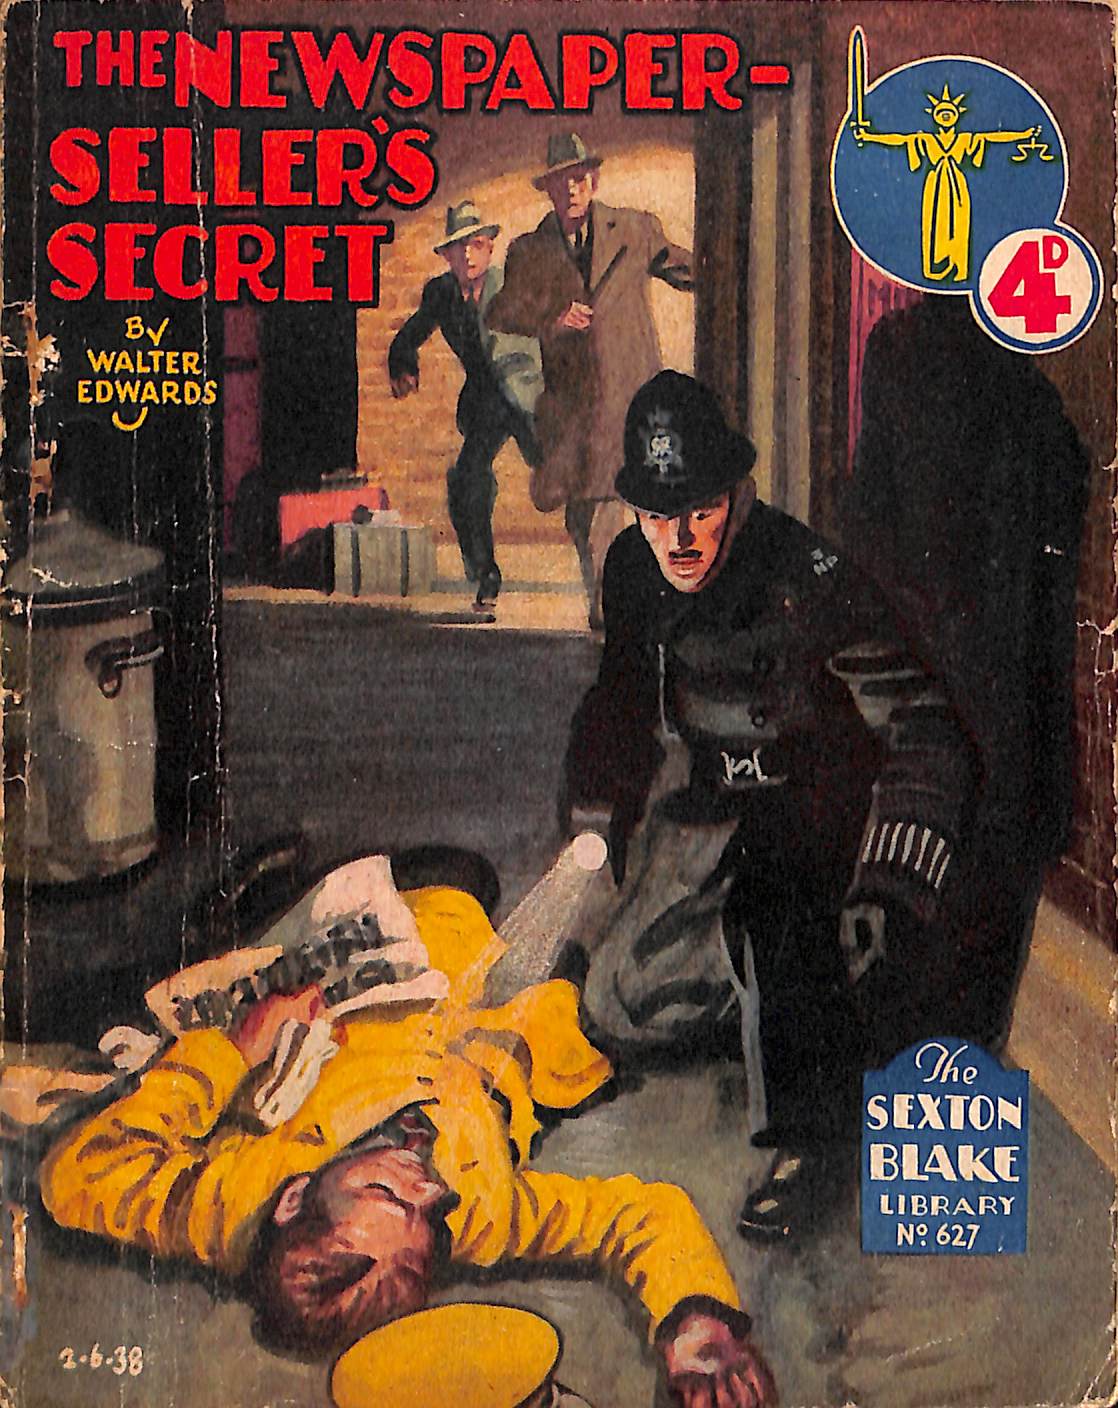 Comic Book Cover For Sexton Blake Library S2 627 - The Newspaper Seller's Secret